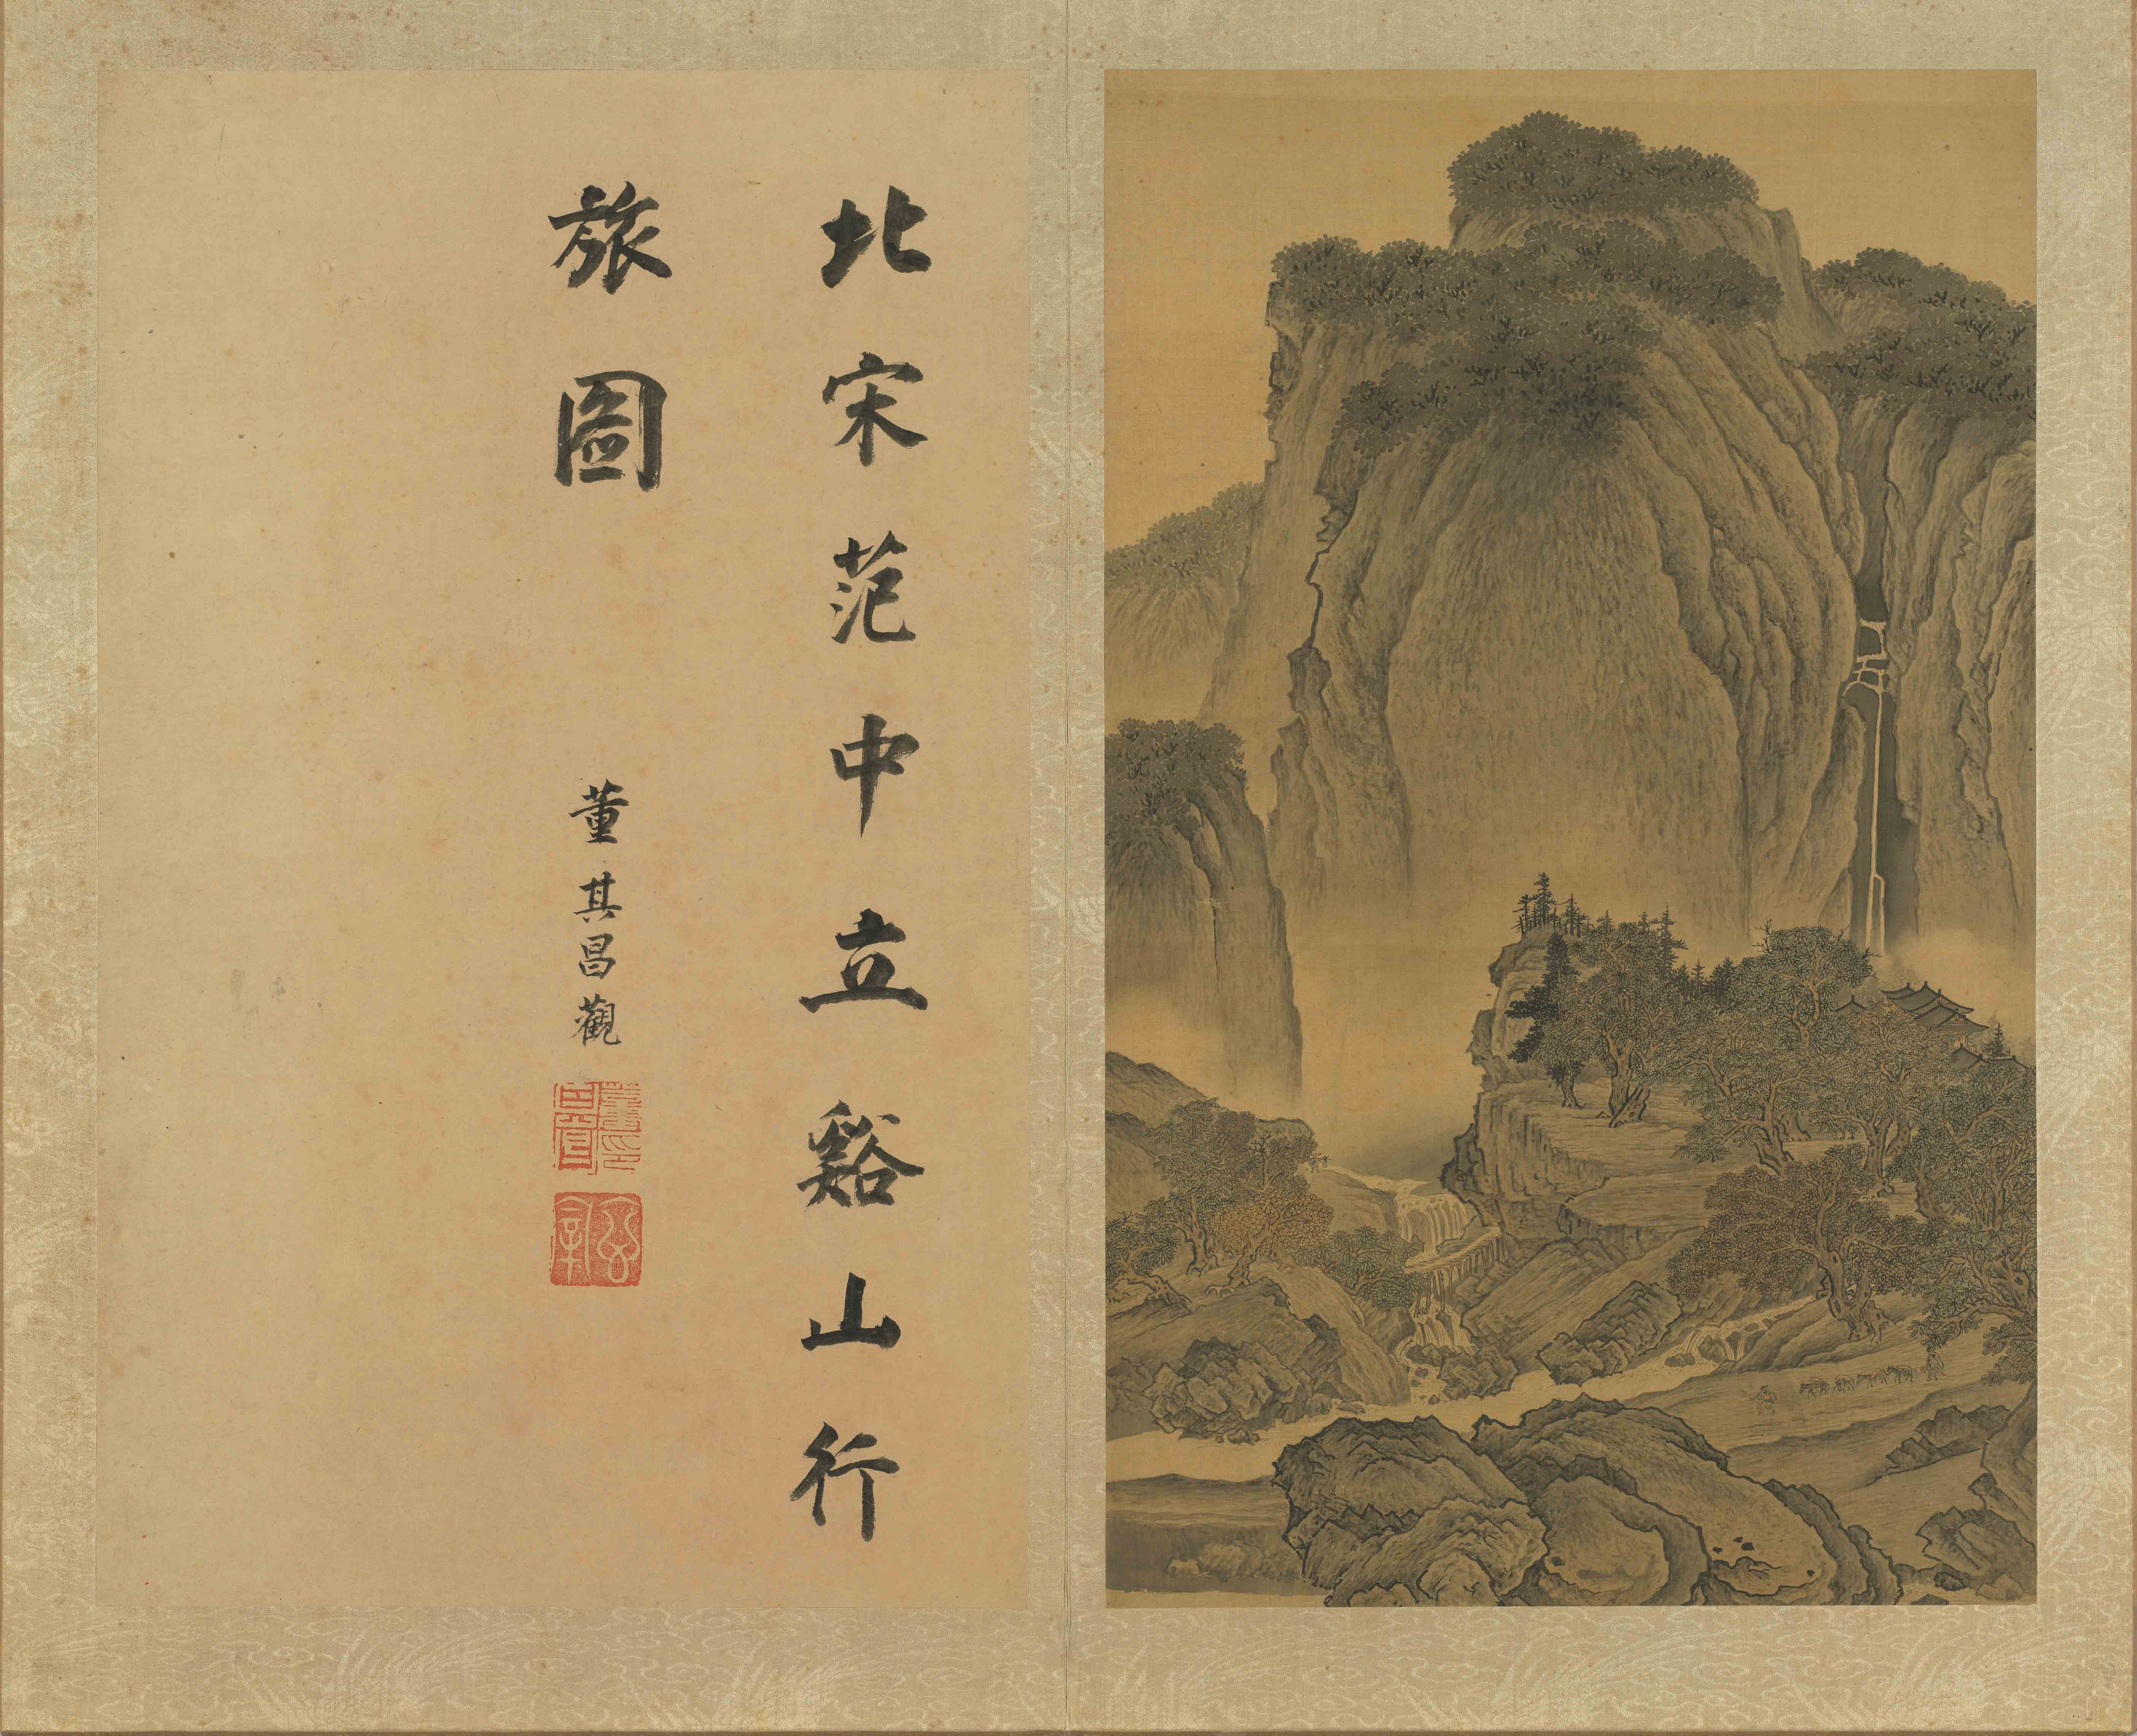 Imitating Fan Kuan's 'Travelers Among Mountains and Streams' Inscribed by Dong Qichang (1555-1636), Ming dynasty